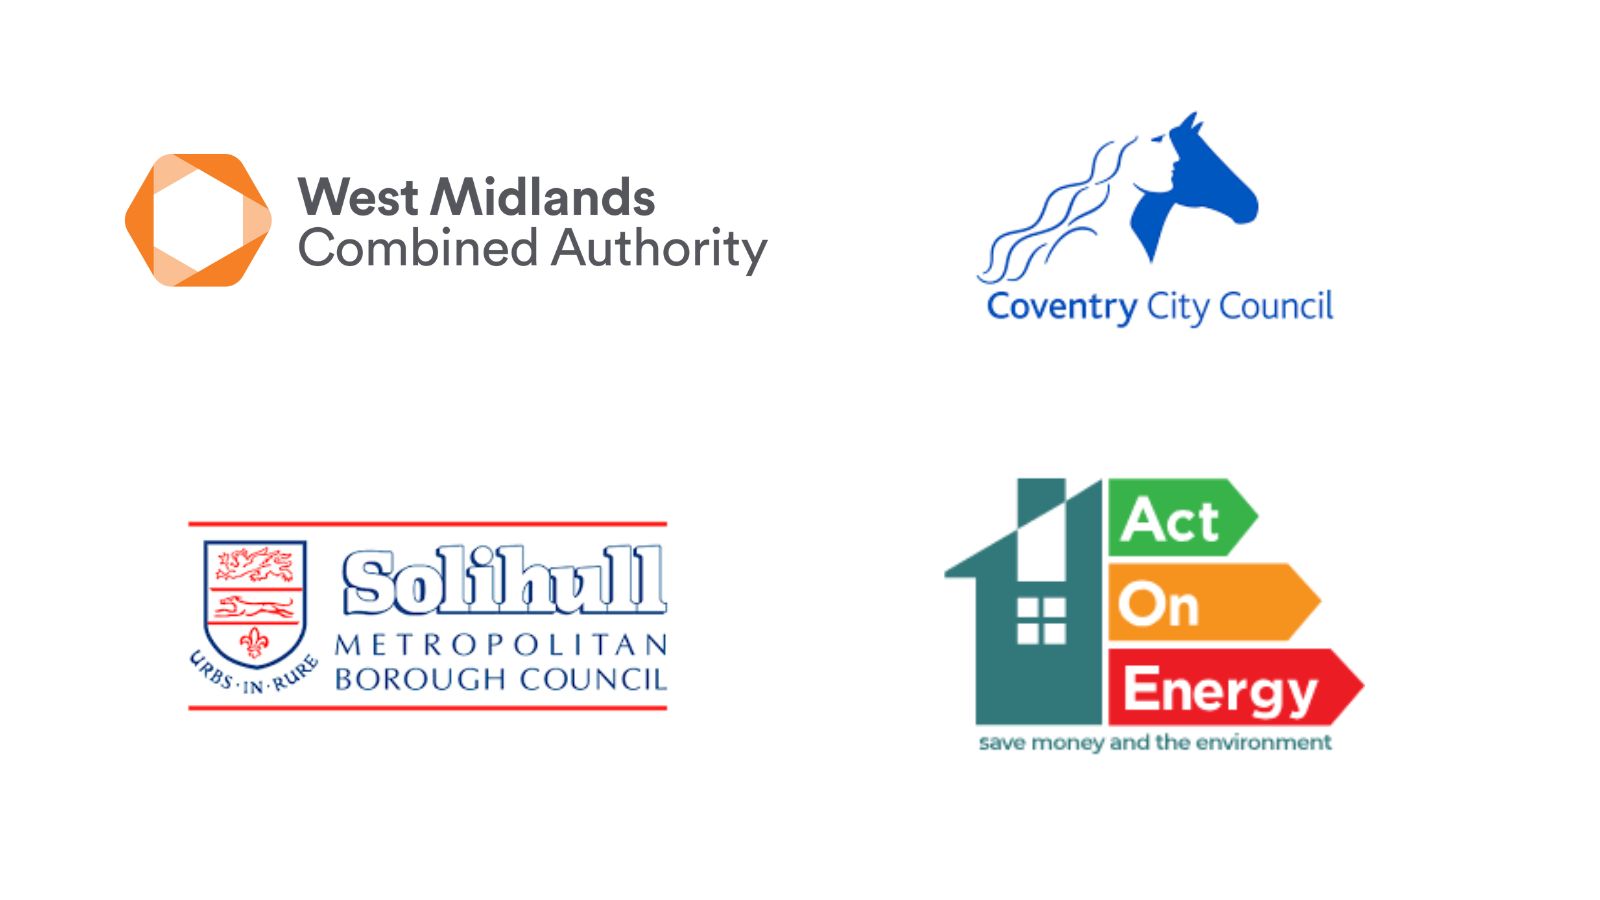 The graphic shows the logos of West Midlands Combined Authority, Coventry City Council, Solihull Council and the Act on Energy campaign